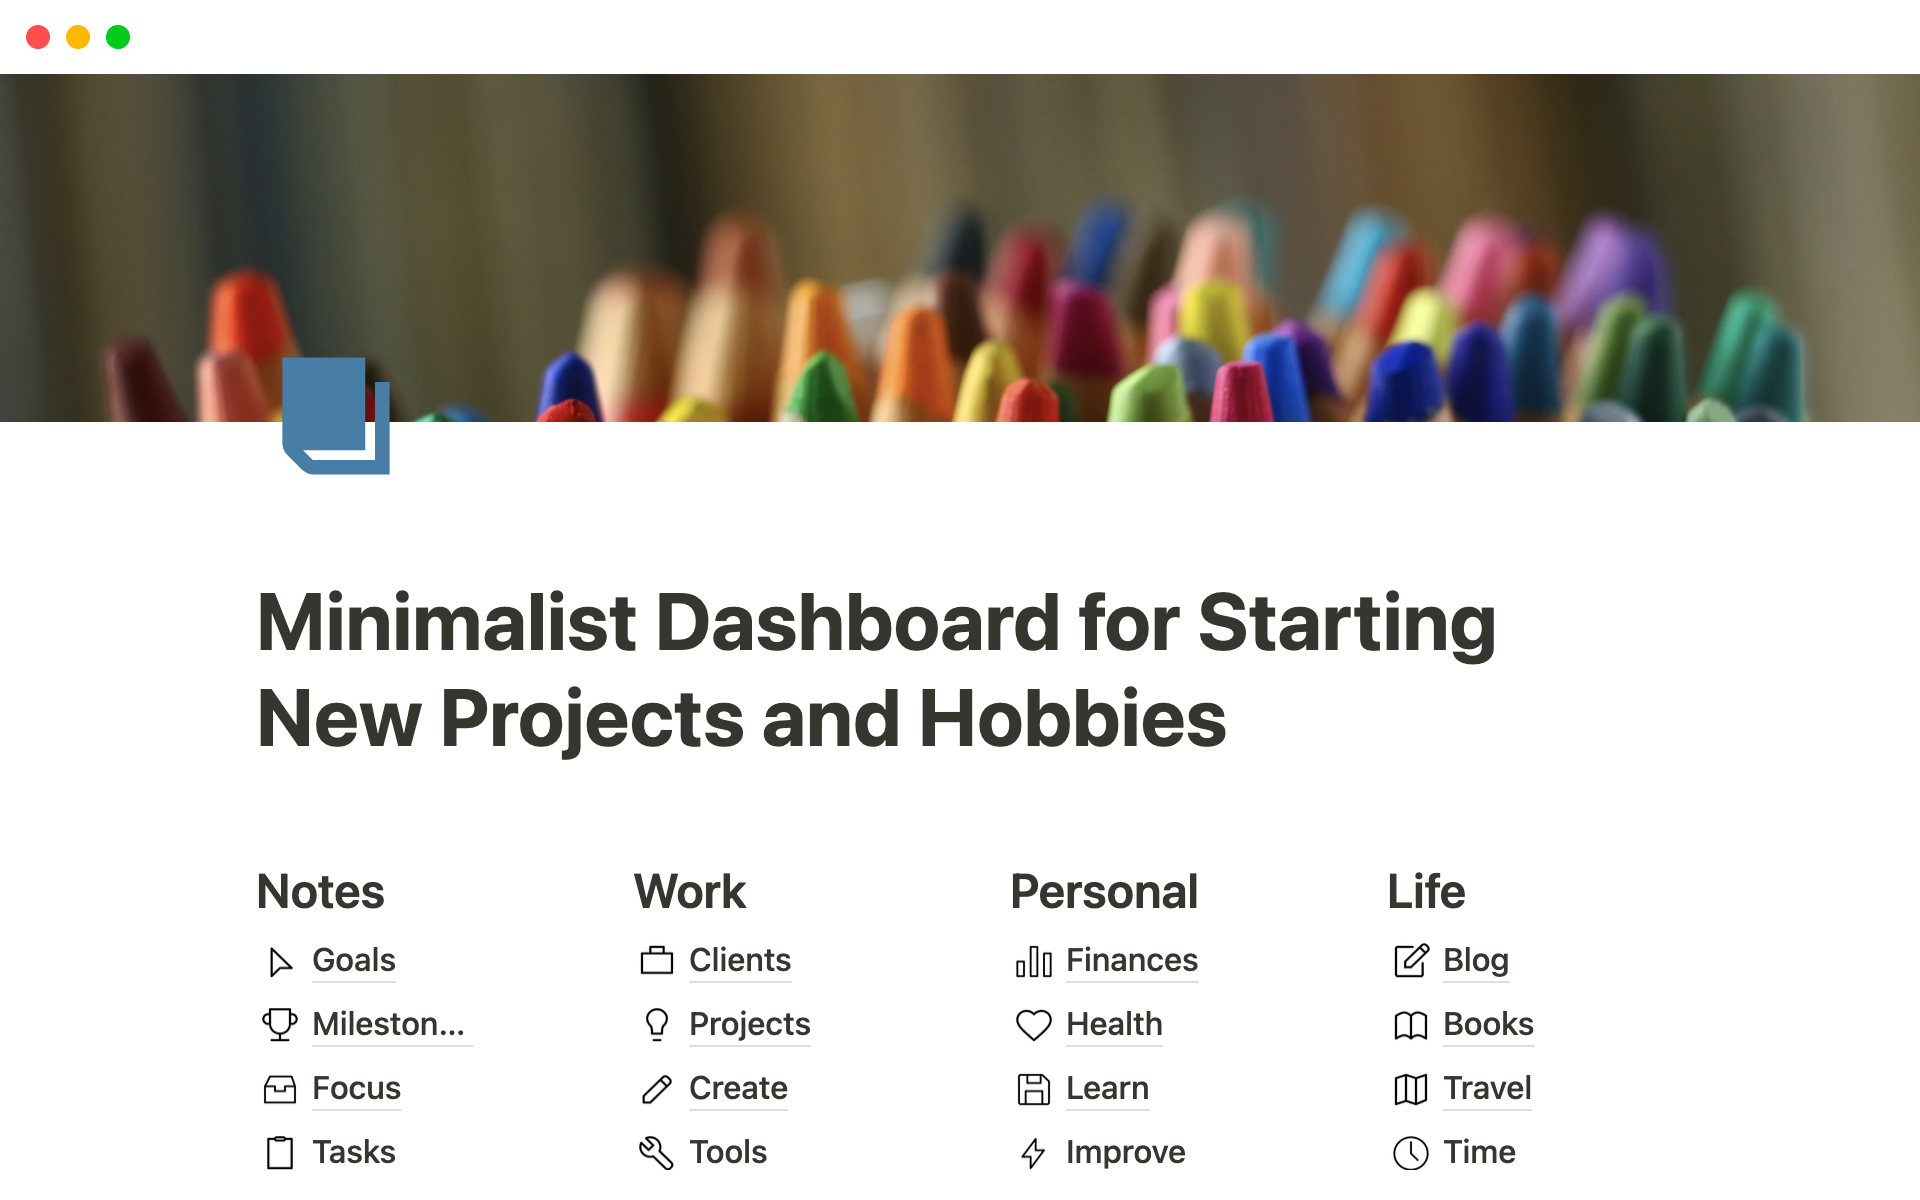 This template offer a simple and intuitive solution for managing your projects and hobbies